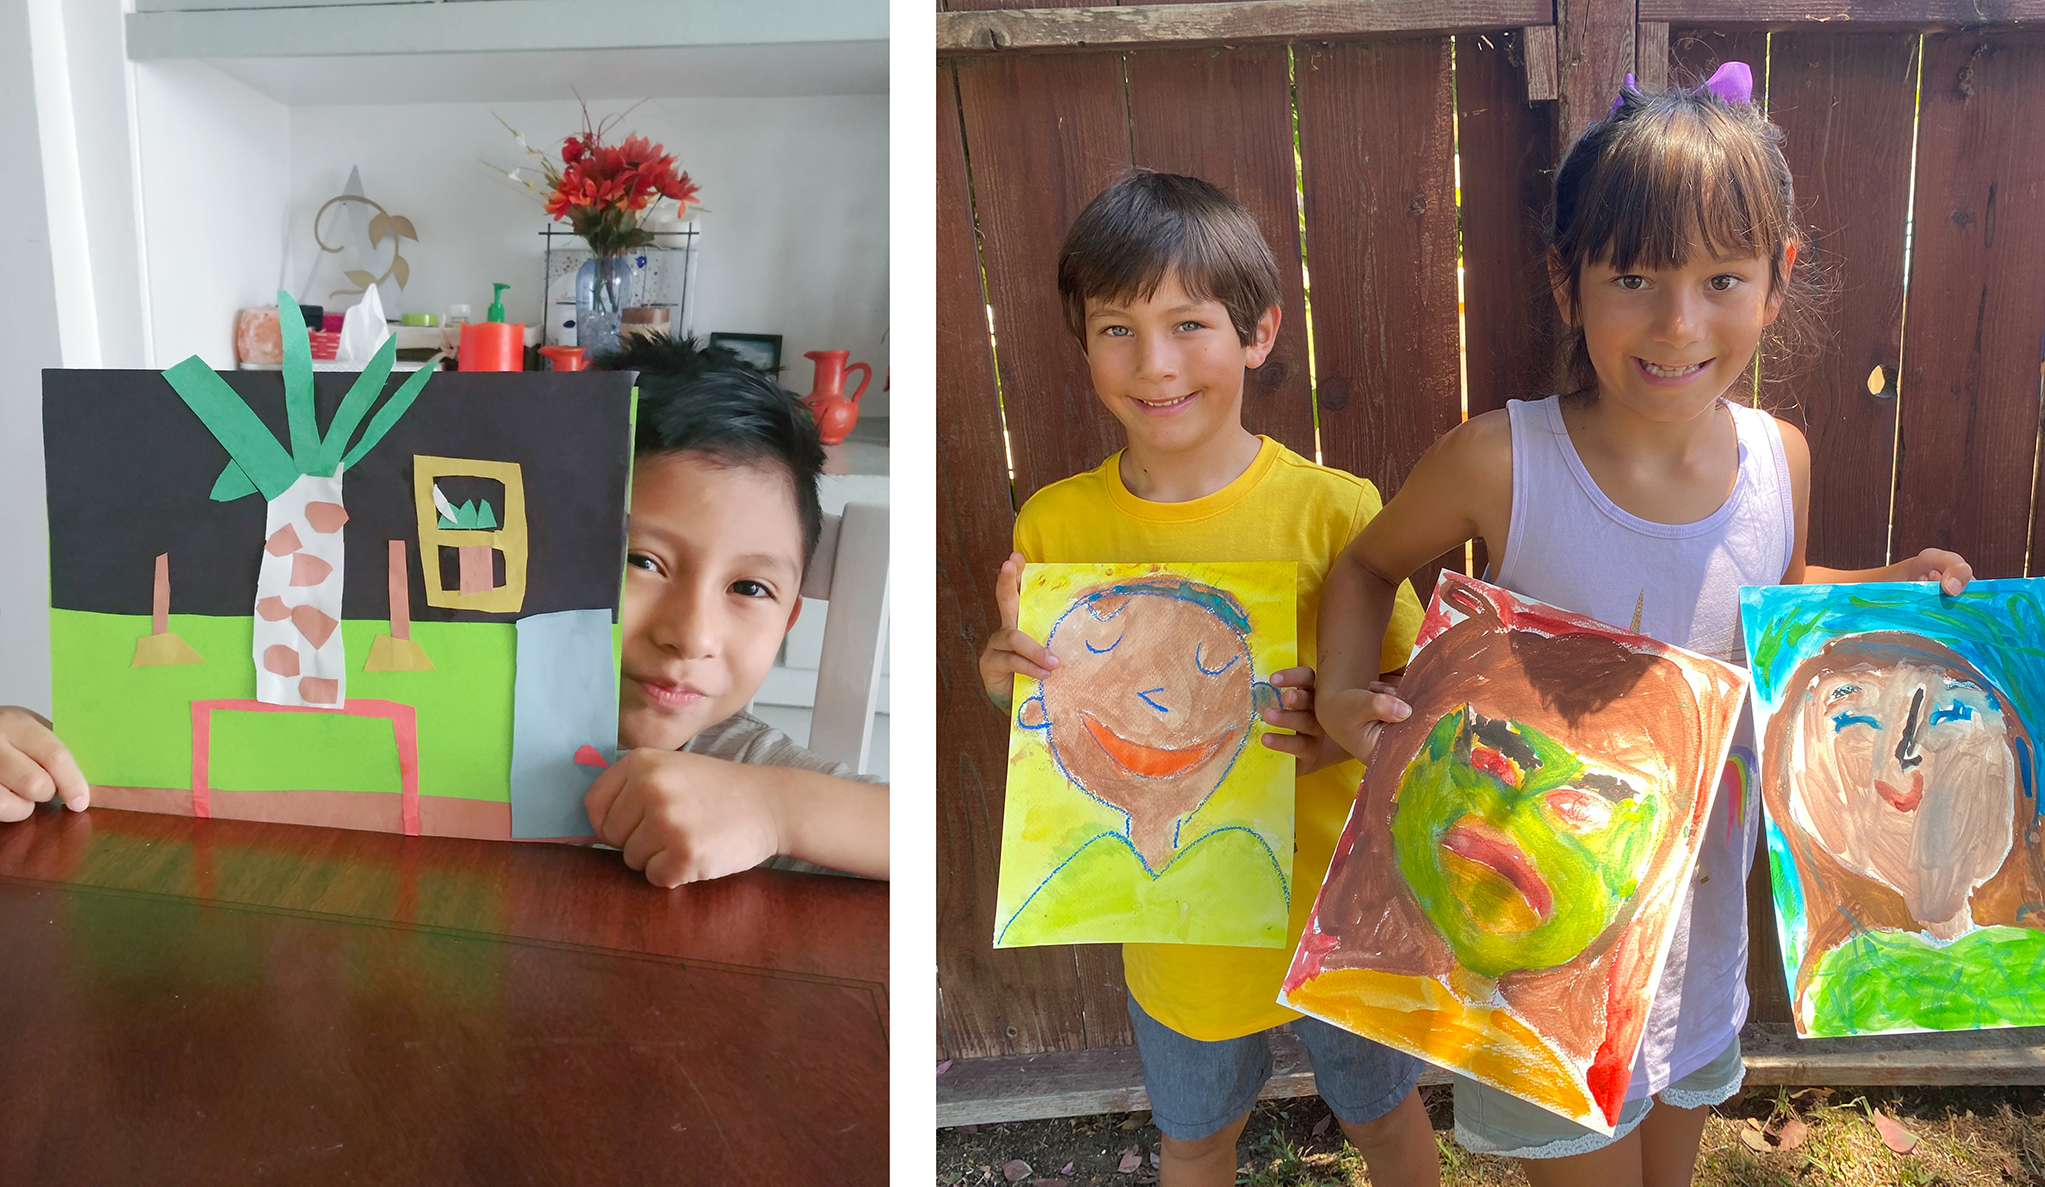 Campers show off their artwork!